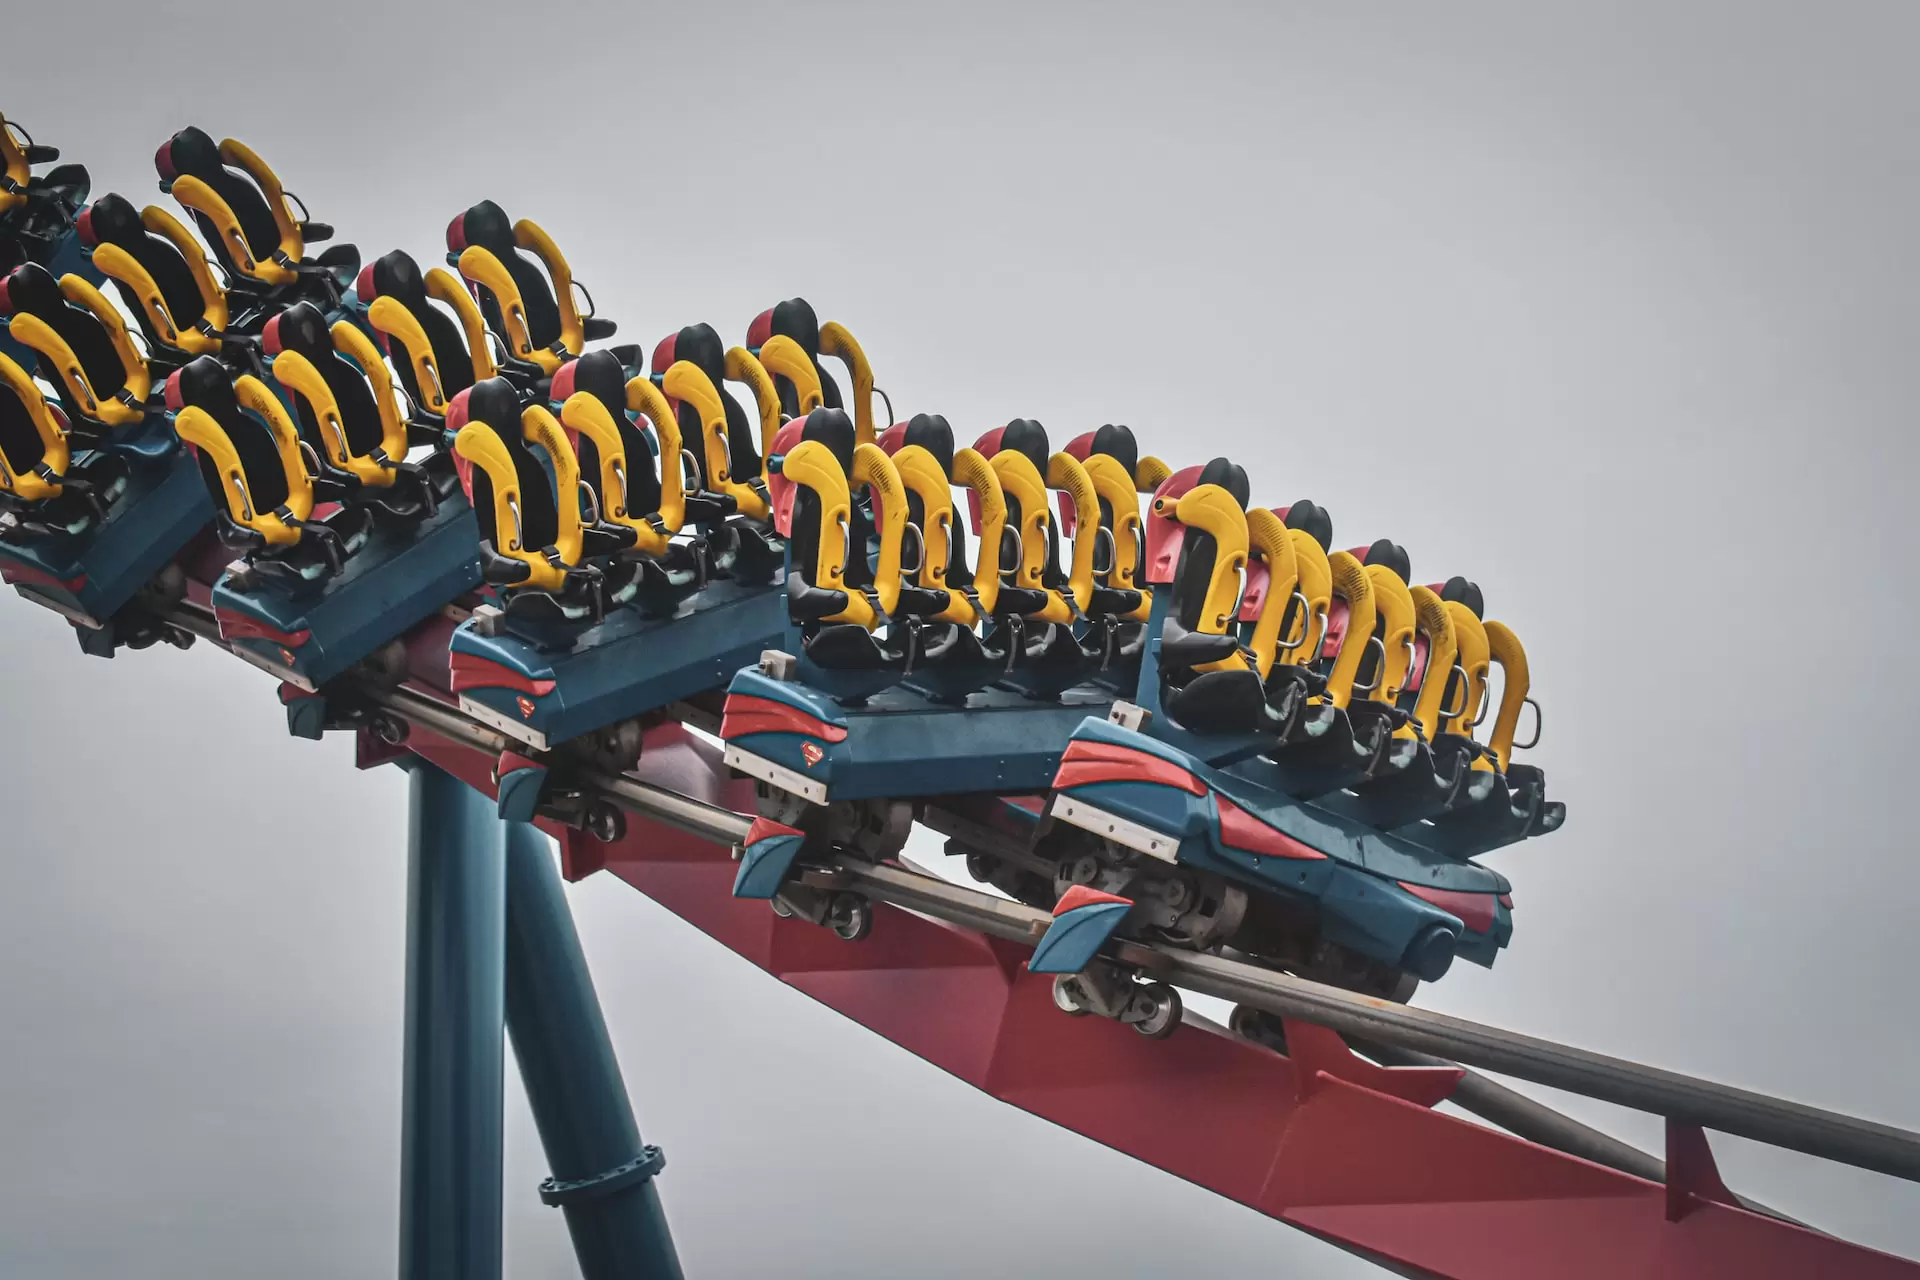 A rollercoaster at an amusement park in Katy, Texas